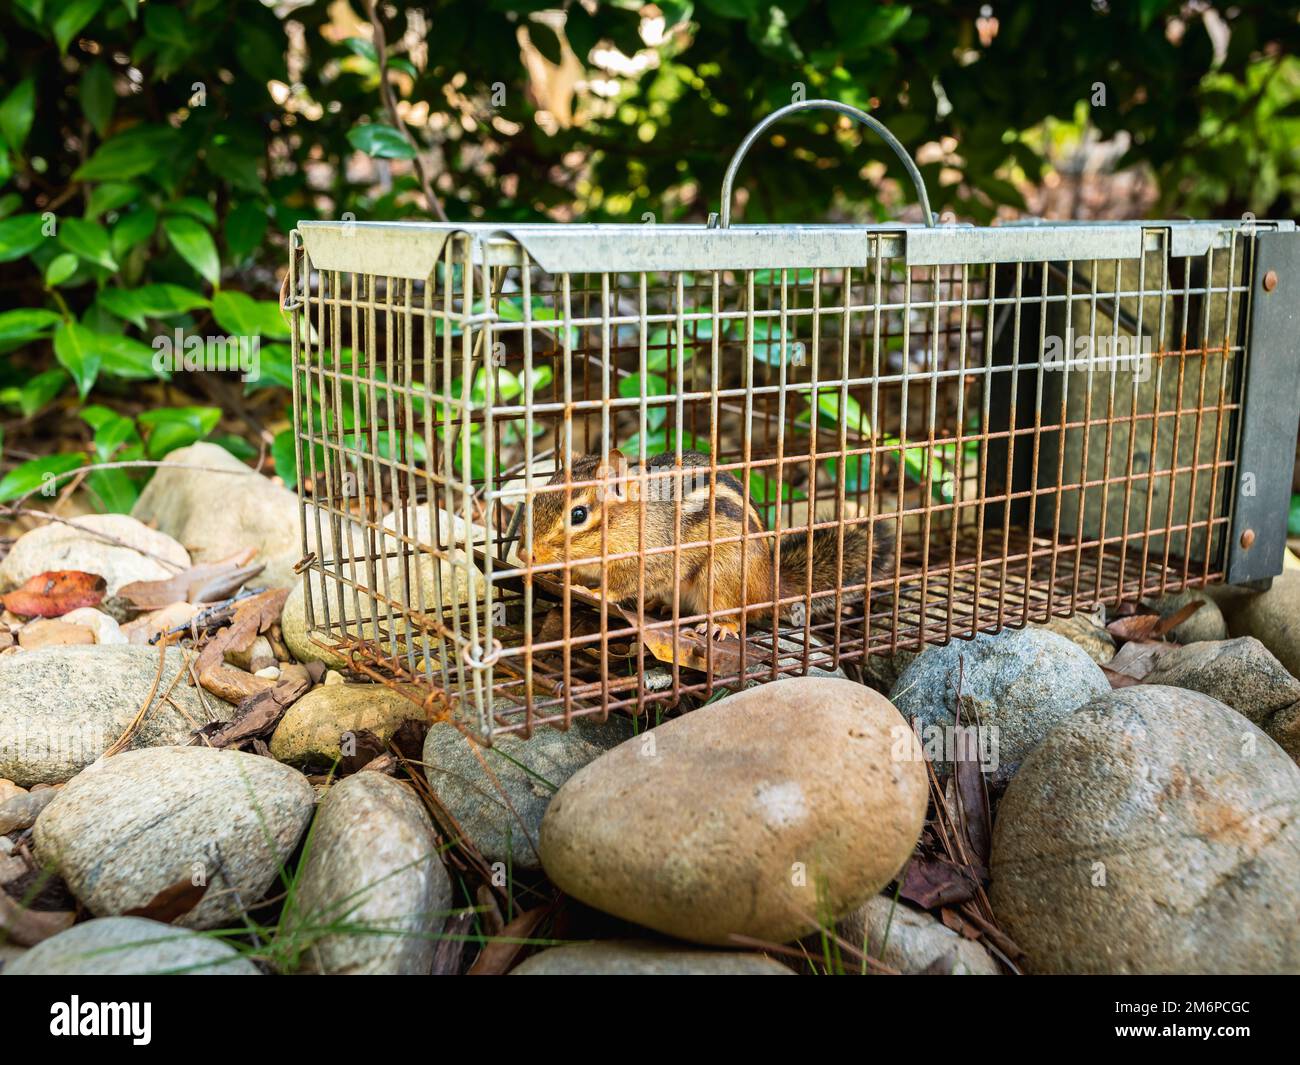 https://c8.alamy.com/comp/2M6PCGC/chipmunk-in-live-humane-trap-pest-and-rodent-removal-cage-catch-and-release-wildlife-animal-control-service-2M6PCGC.jpg